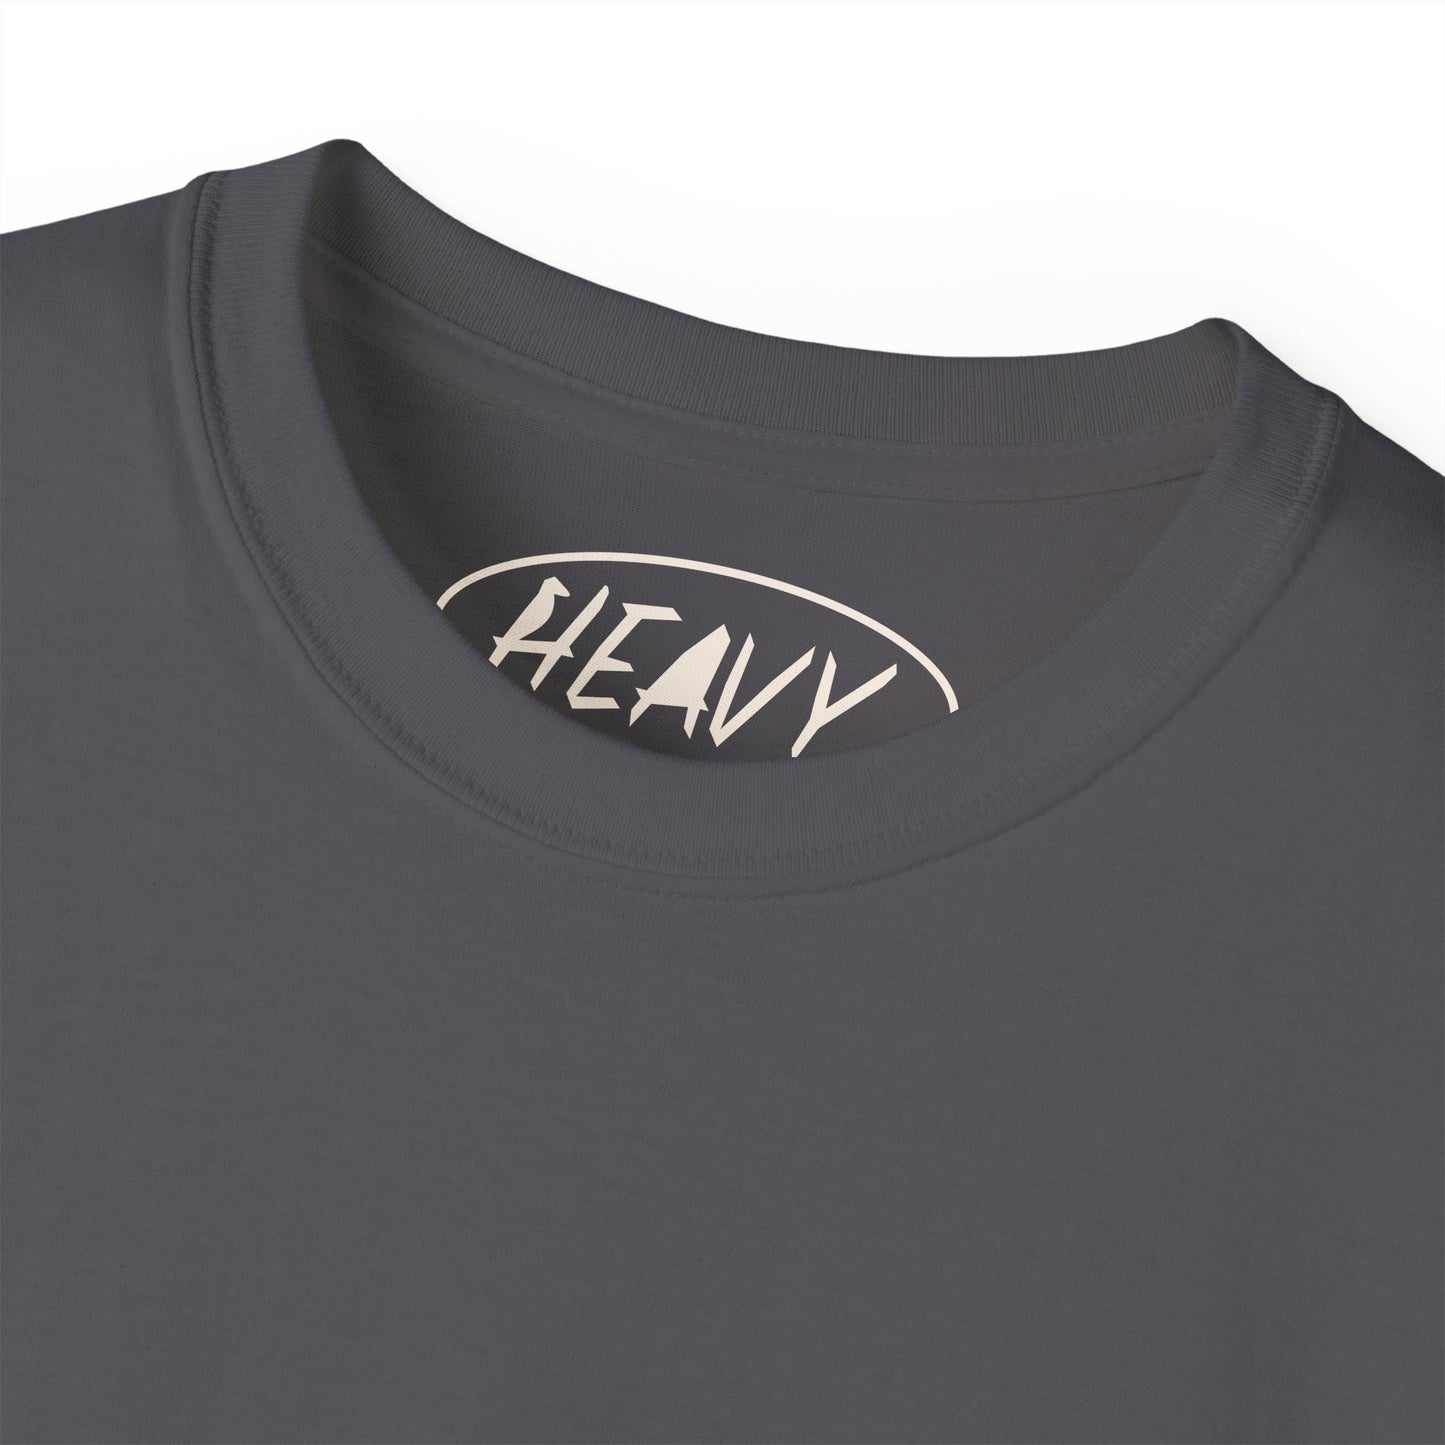 Heavy Limited February - Charcoal